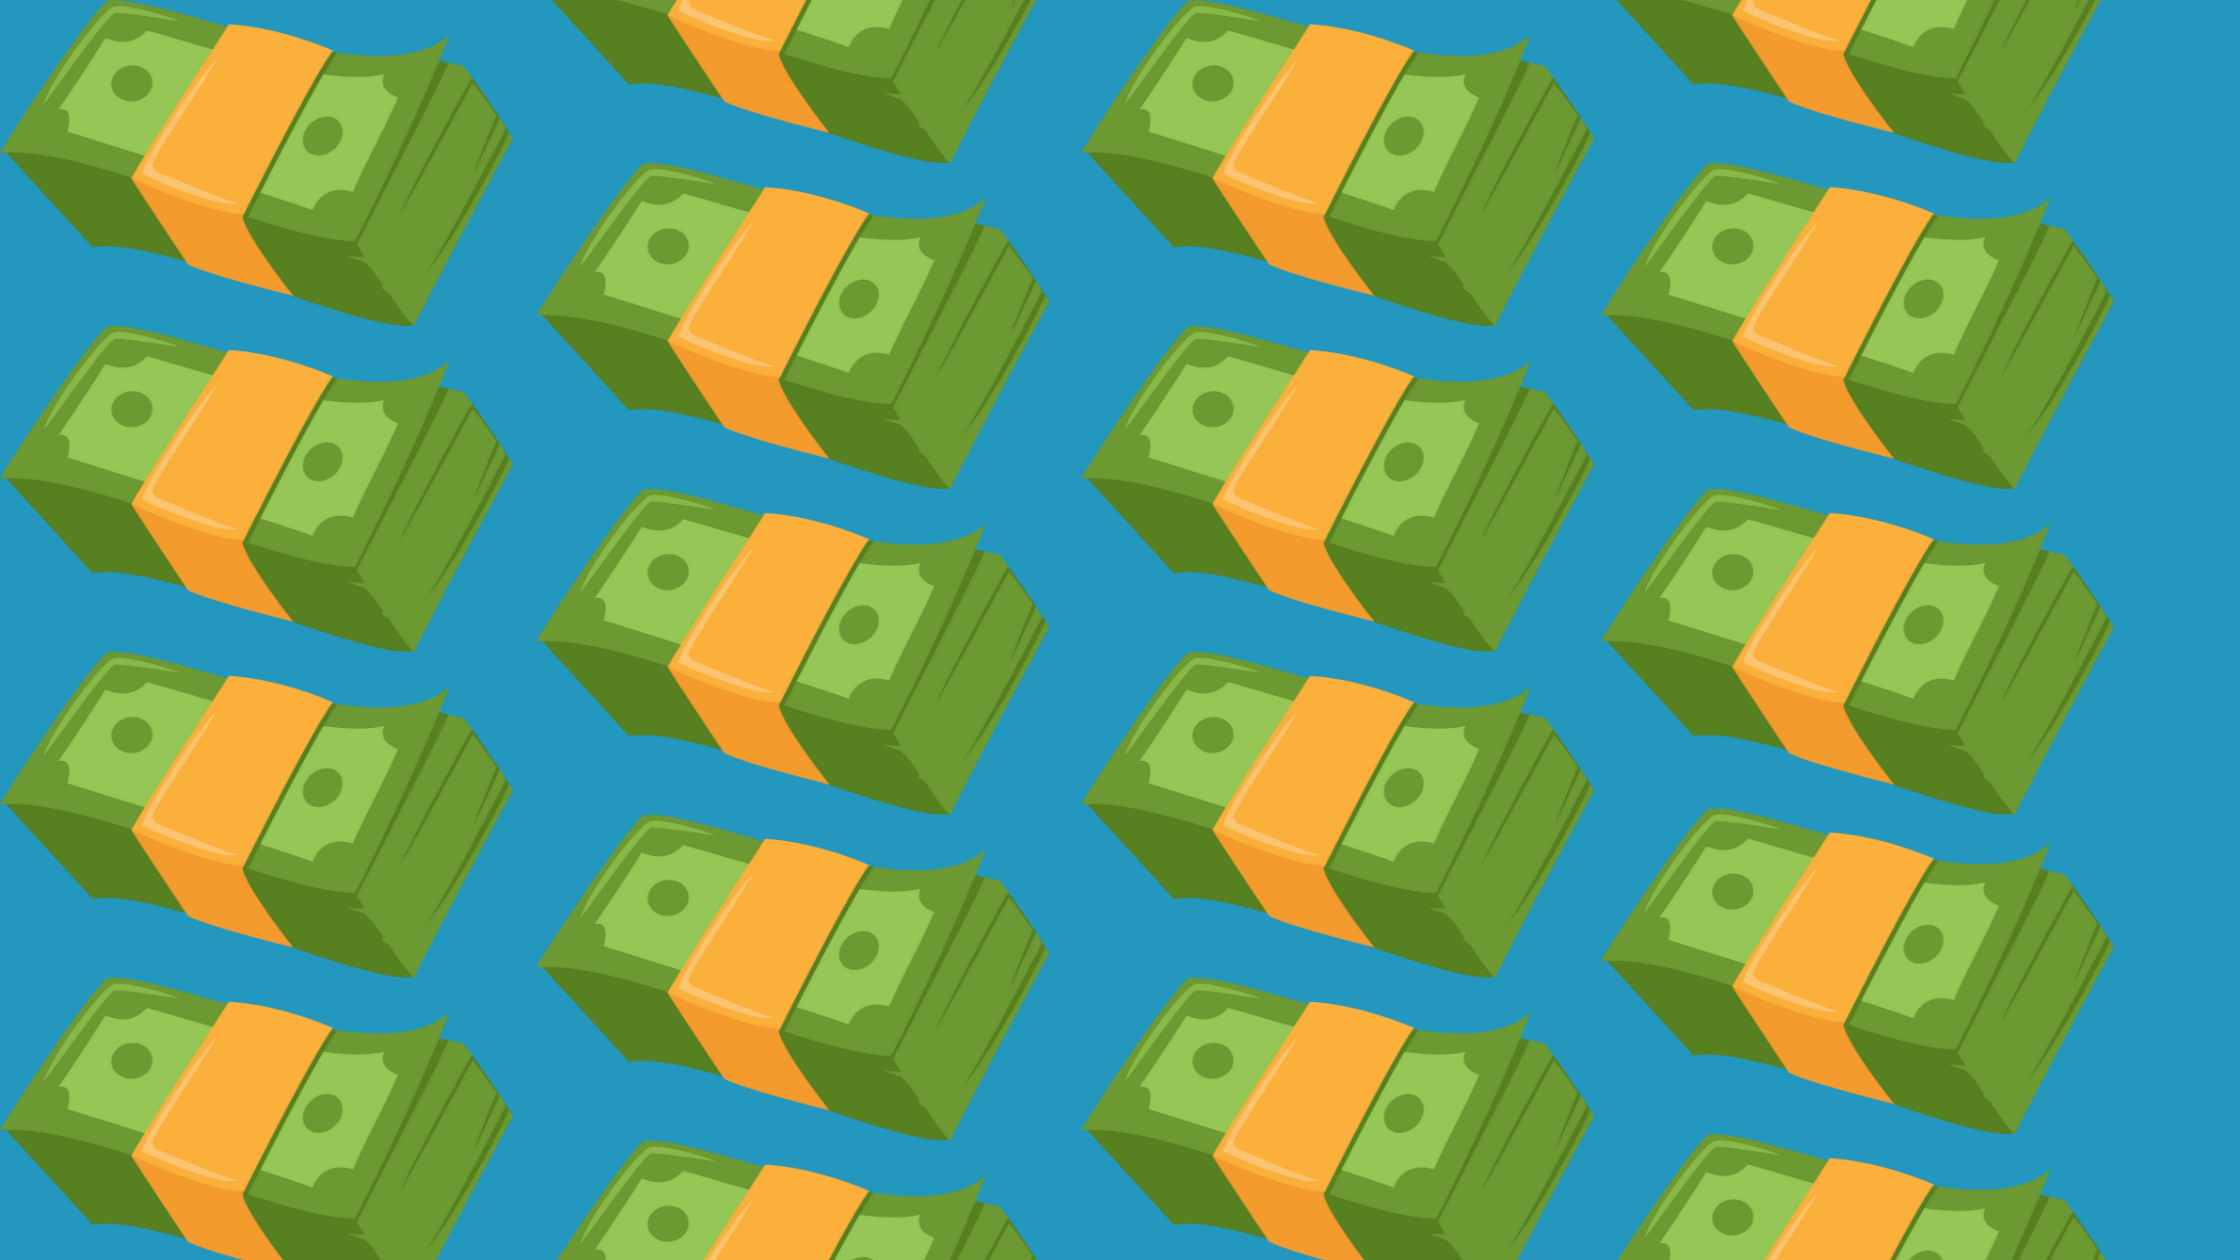 A repeating pattern of money bundle graphics